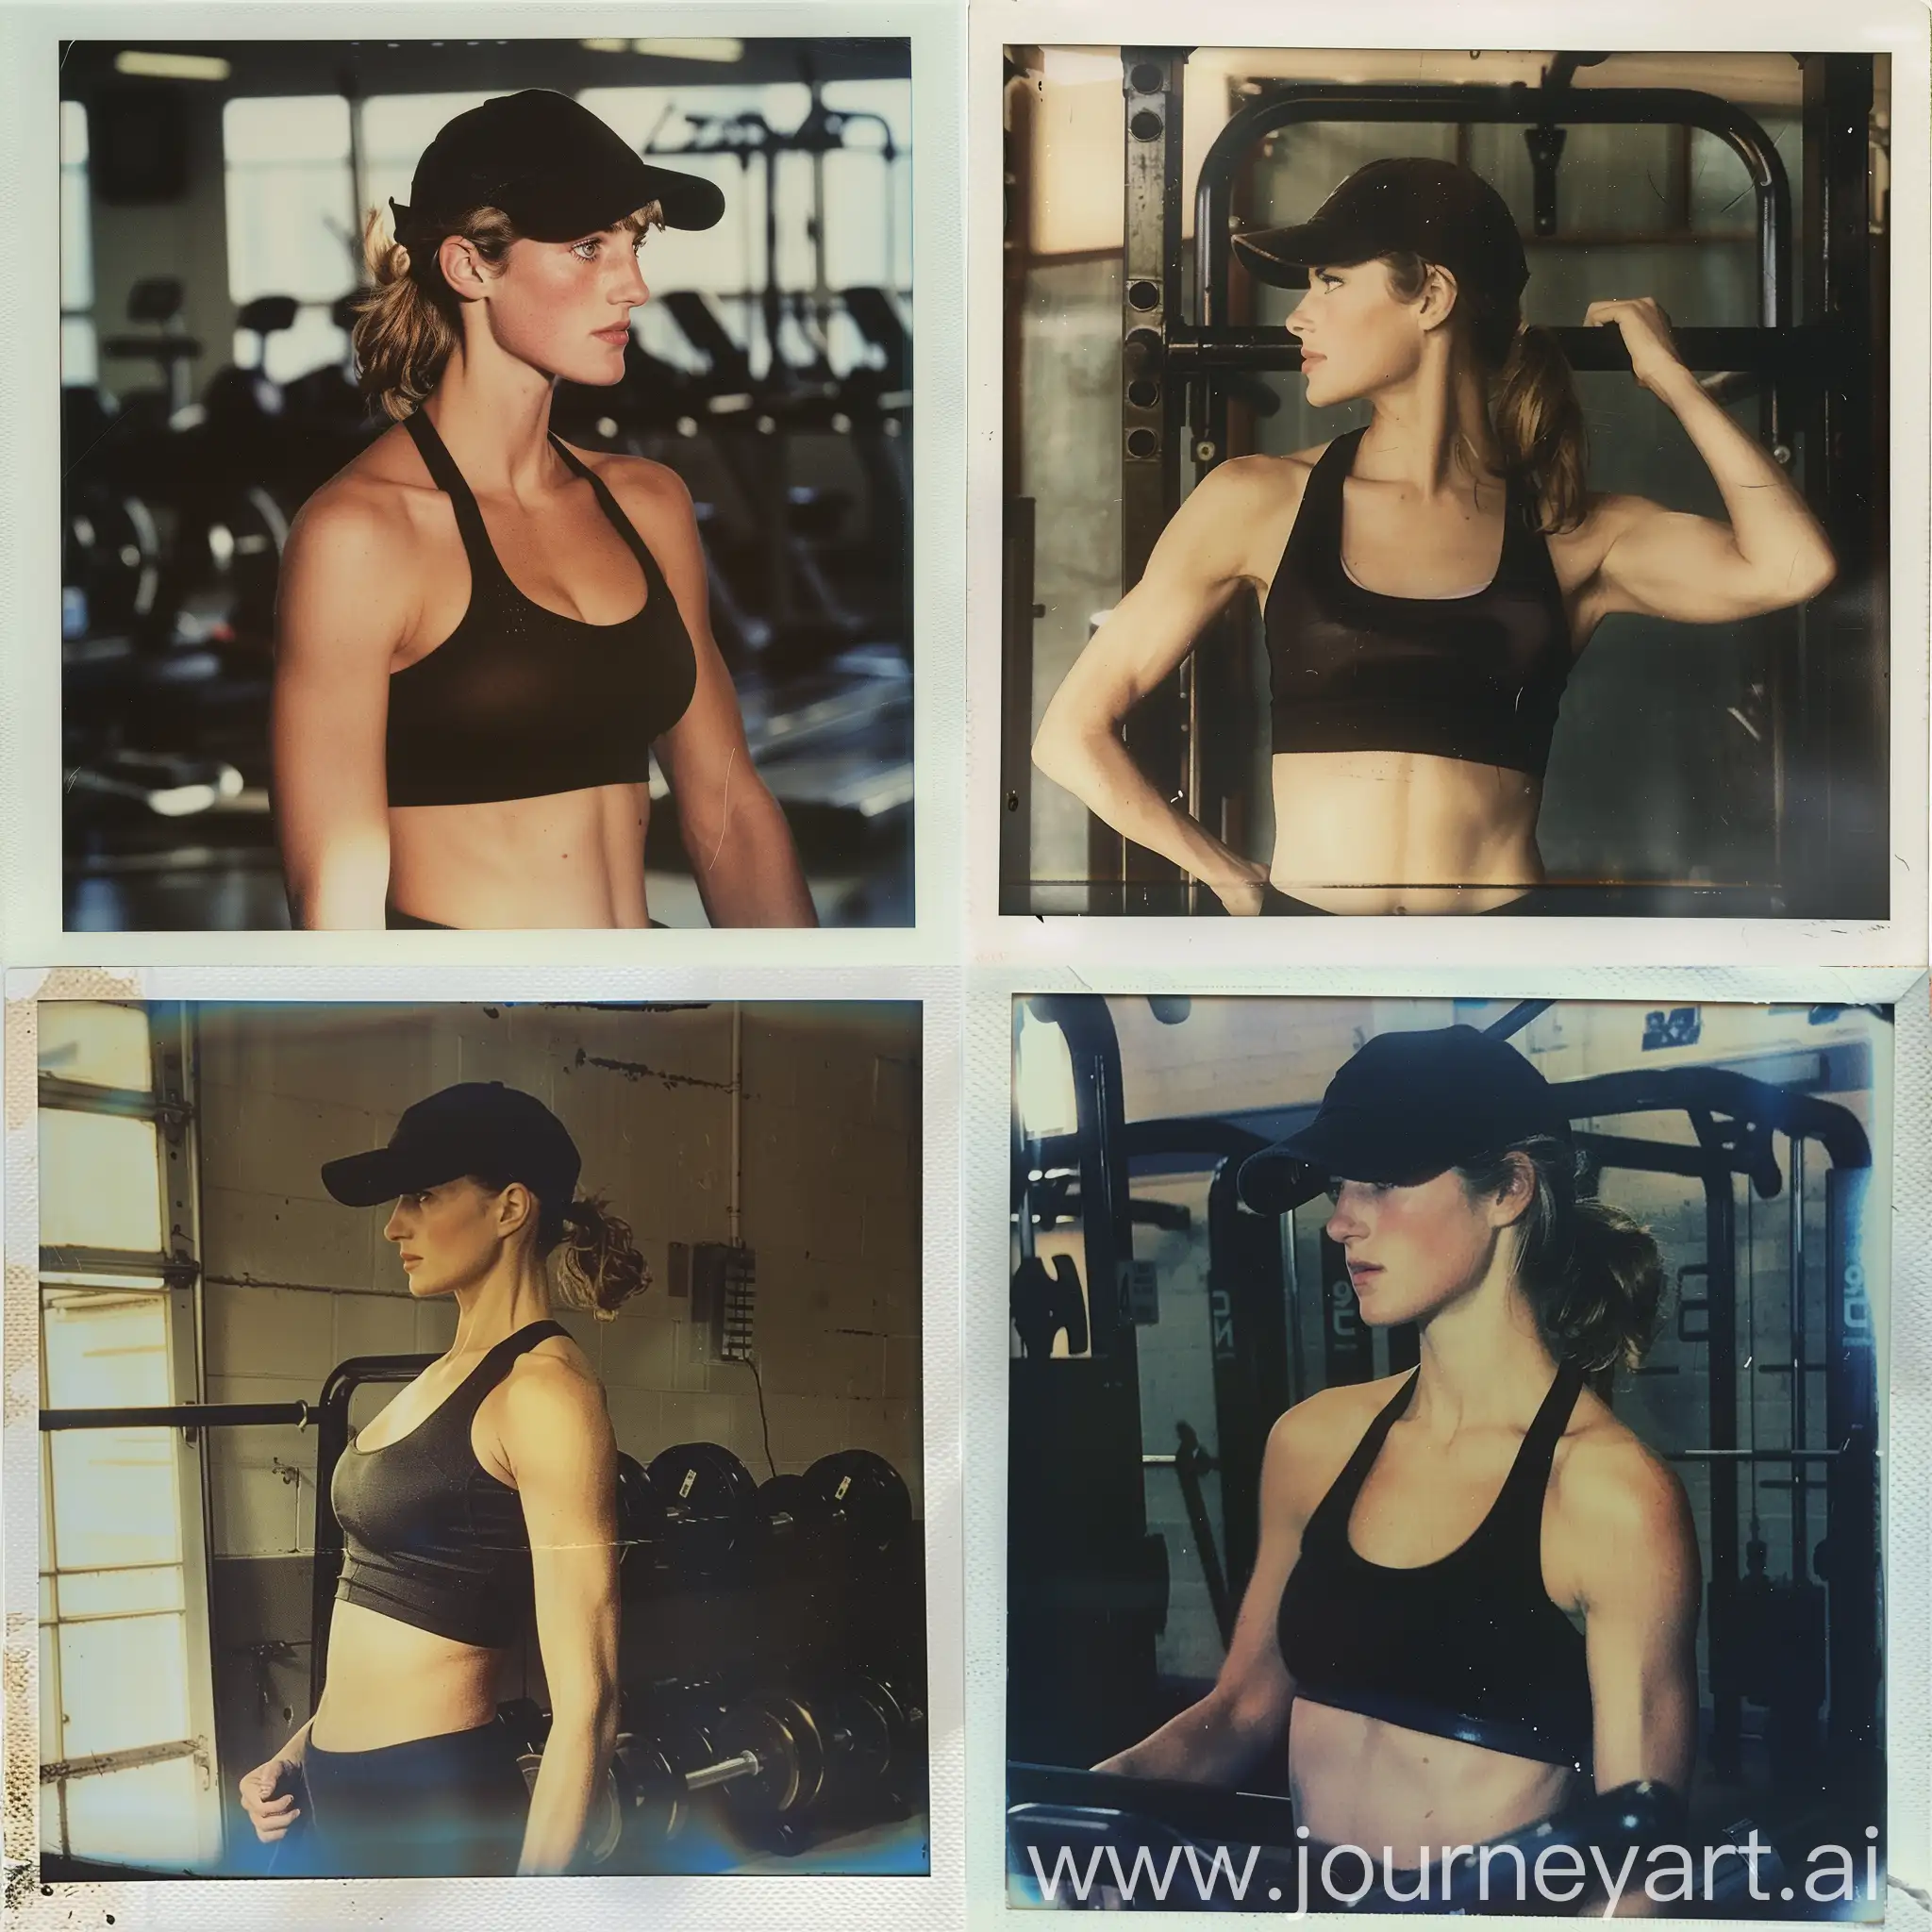 4x4 collage of Princess Diana wearing a black cap, black belly tanktop, and black leggings, while working out at a gym, 1997... flash on, vintage instant polaroid photo.